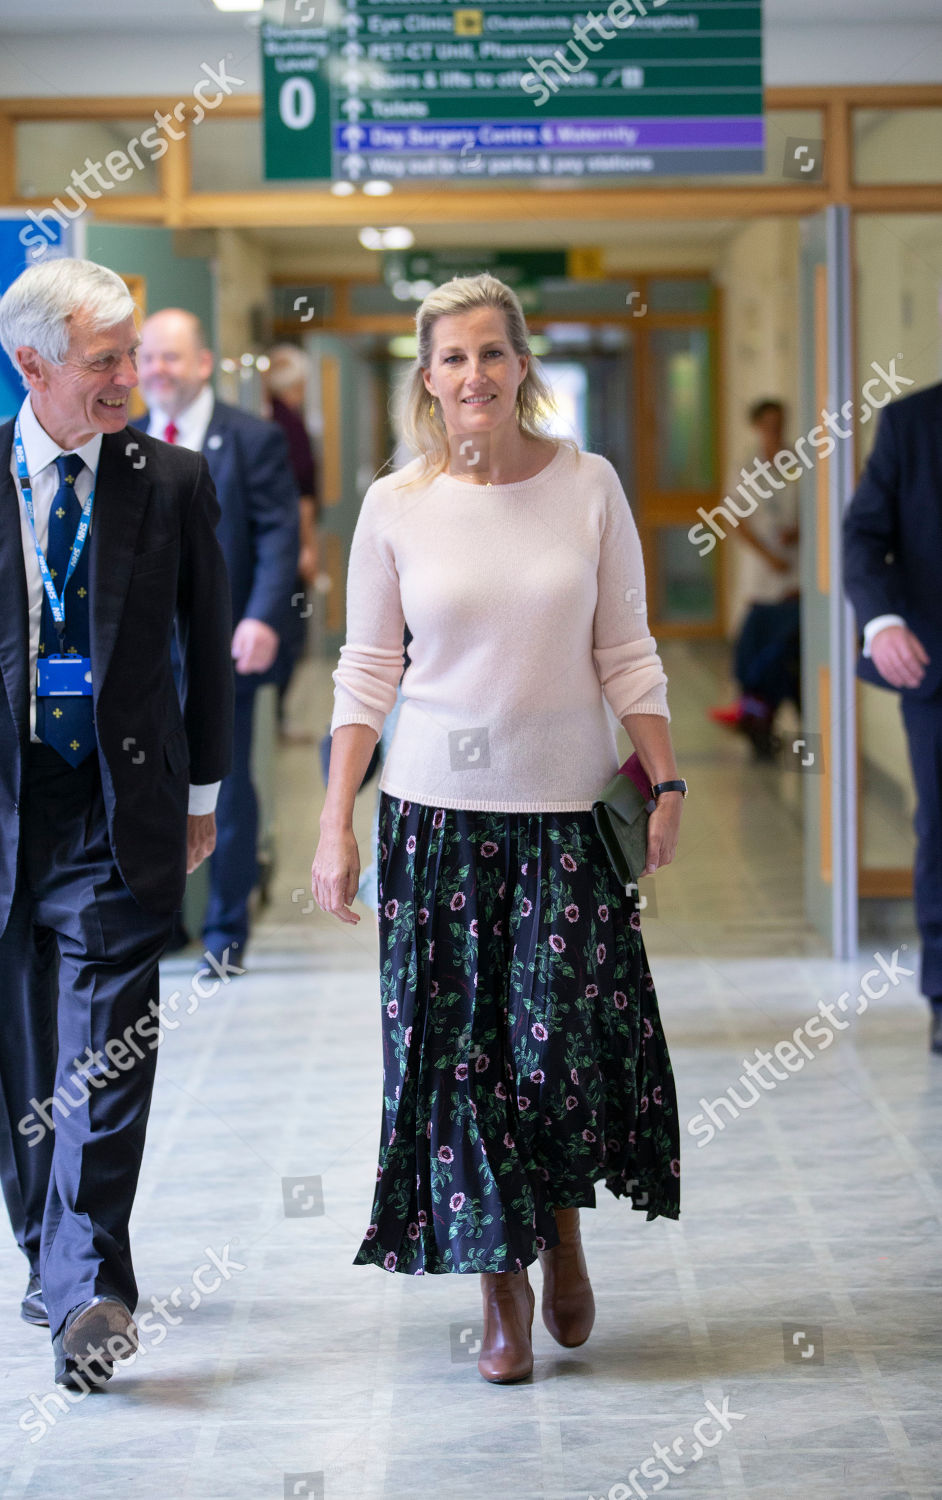 sophie-countess-of-wessex-visit-to-musgrove-park-hospital-taunton-somerset-uk-shutterstock-editorial-10422506i.jpg